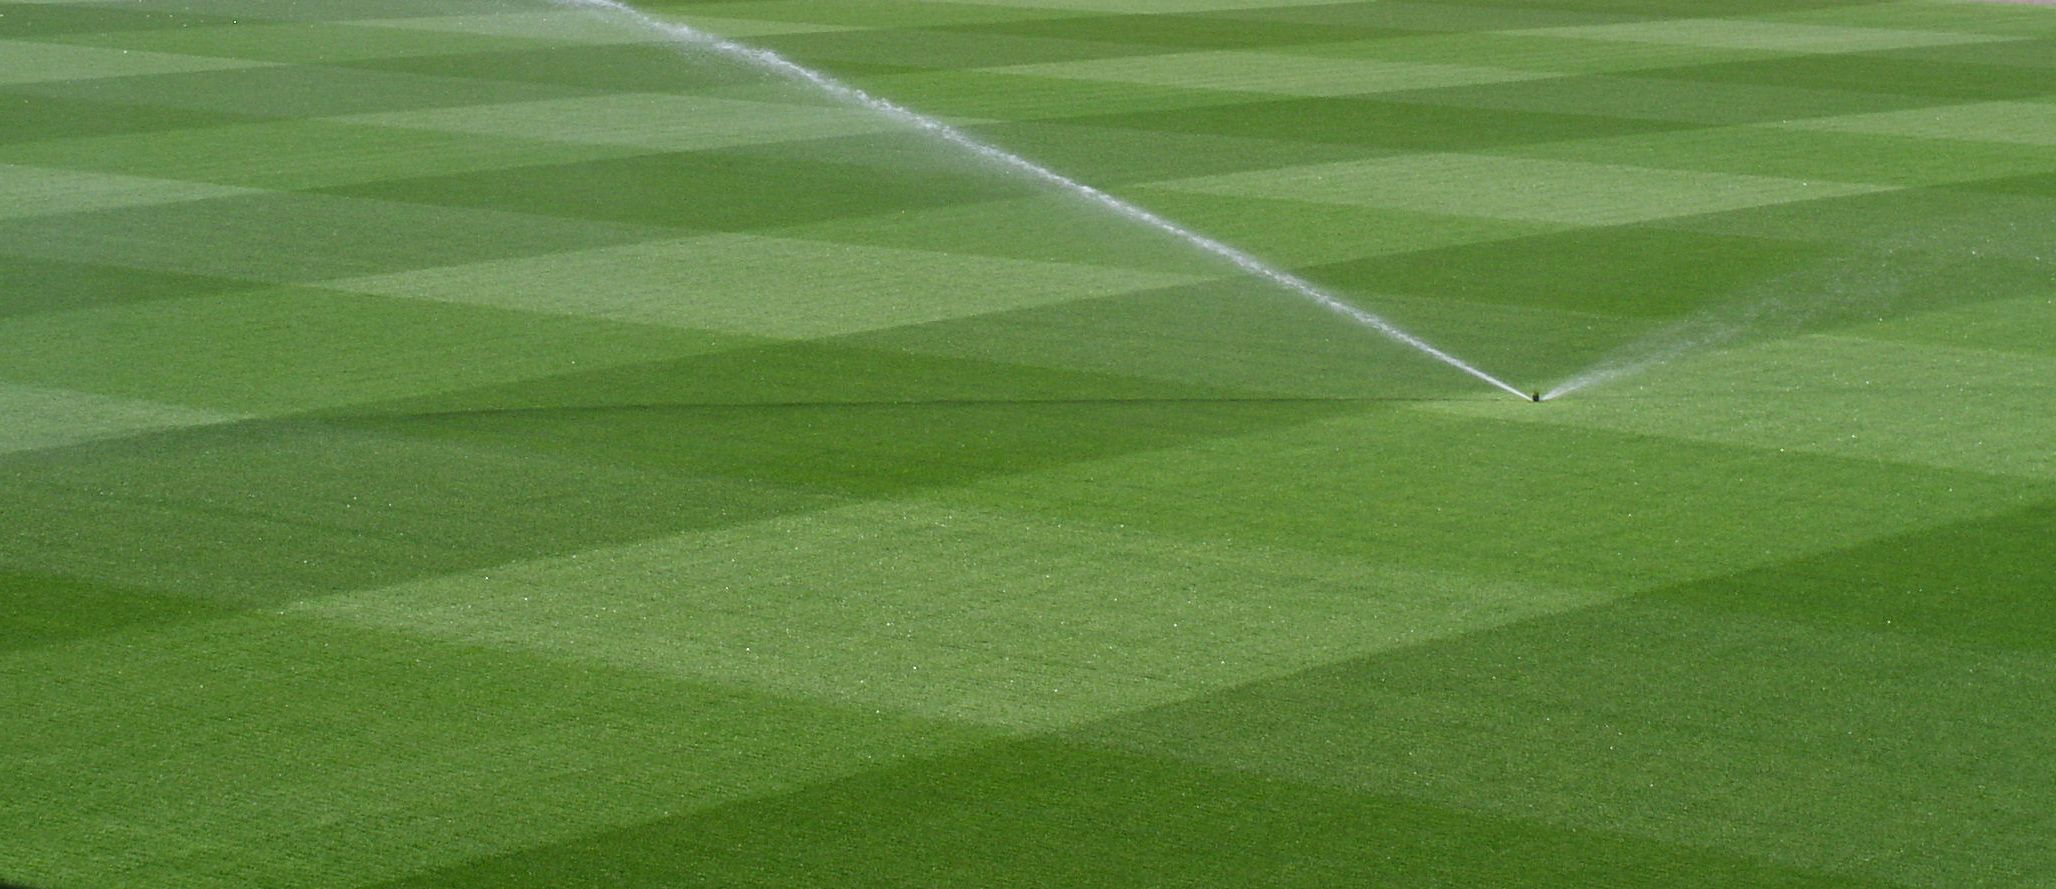 Off-the-shelf seed and fertiliser packages for stress-free sports pitch renovations